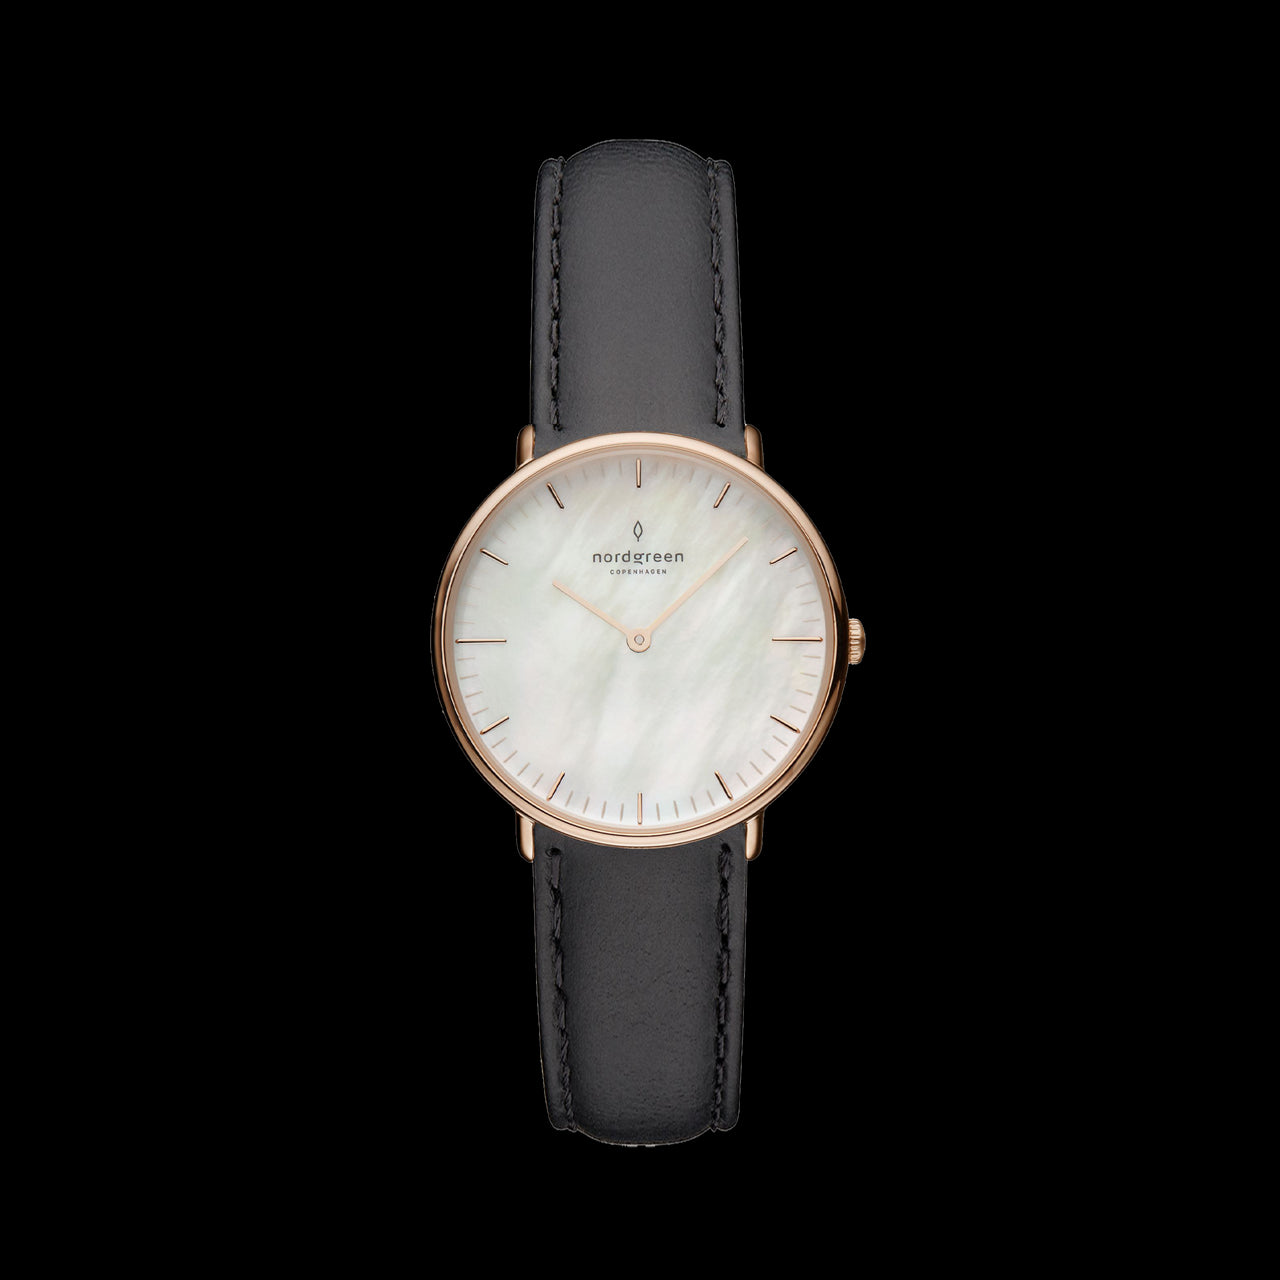 Nordgreen Native Mother Of Pearl dial, Black Leather Rose Gold 28mm